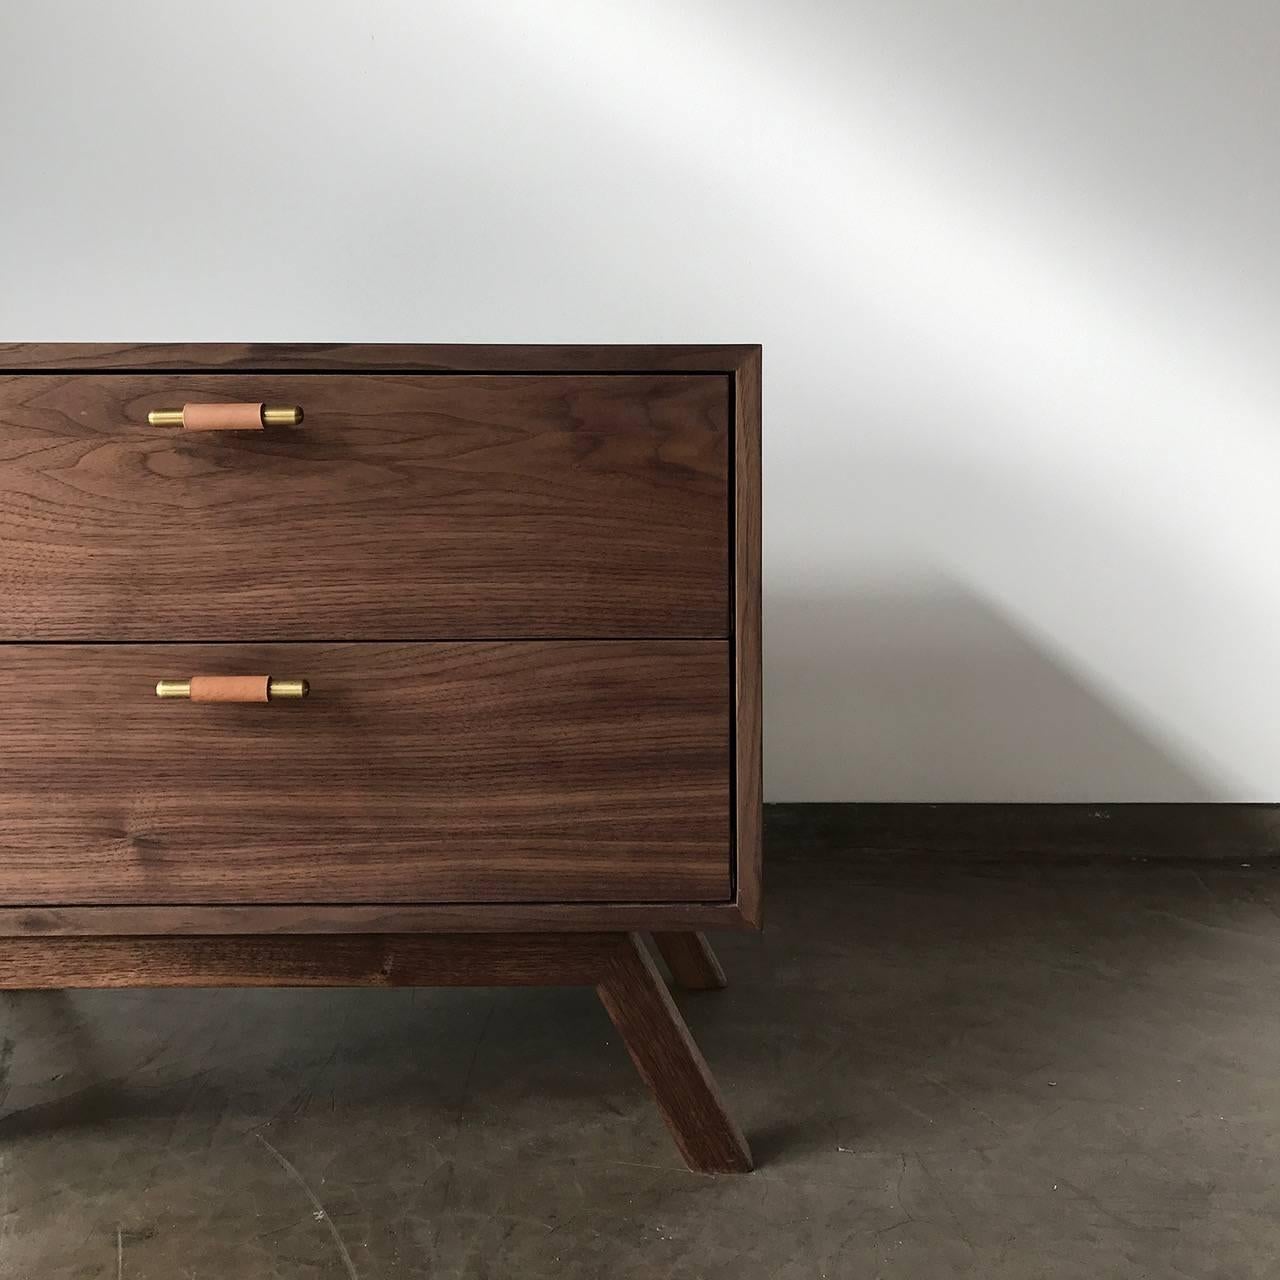 A stylish 2-drawer side table made to order by Thomas Hayes Studio. The Murphy is avaliable in a variety of wood finishes, metal finishes, and leather options. Shown in Walnut Oil, Light Patina Brass, and Natural Leather below. 

Leather Pulls: